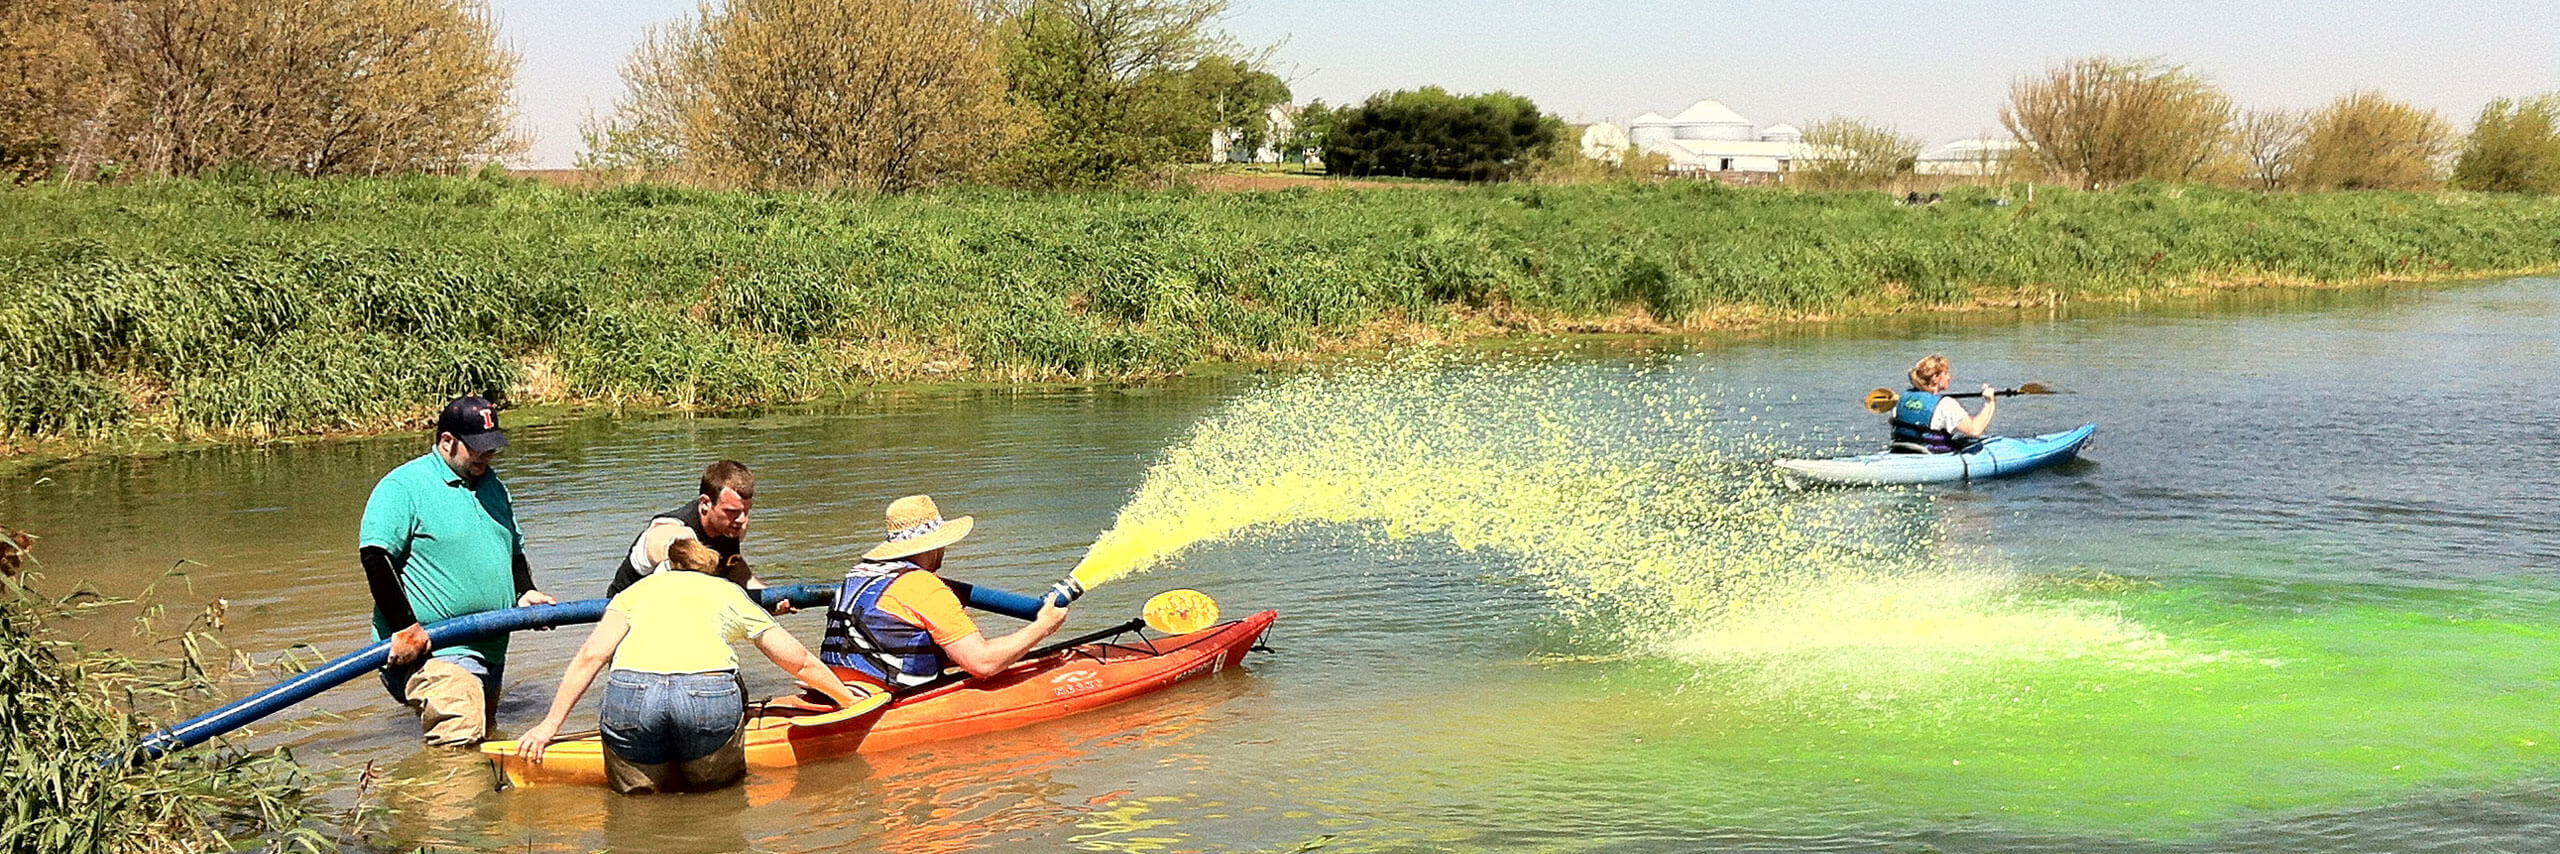 Students on a boat spraying green foam on the lake for water center research.